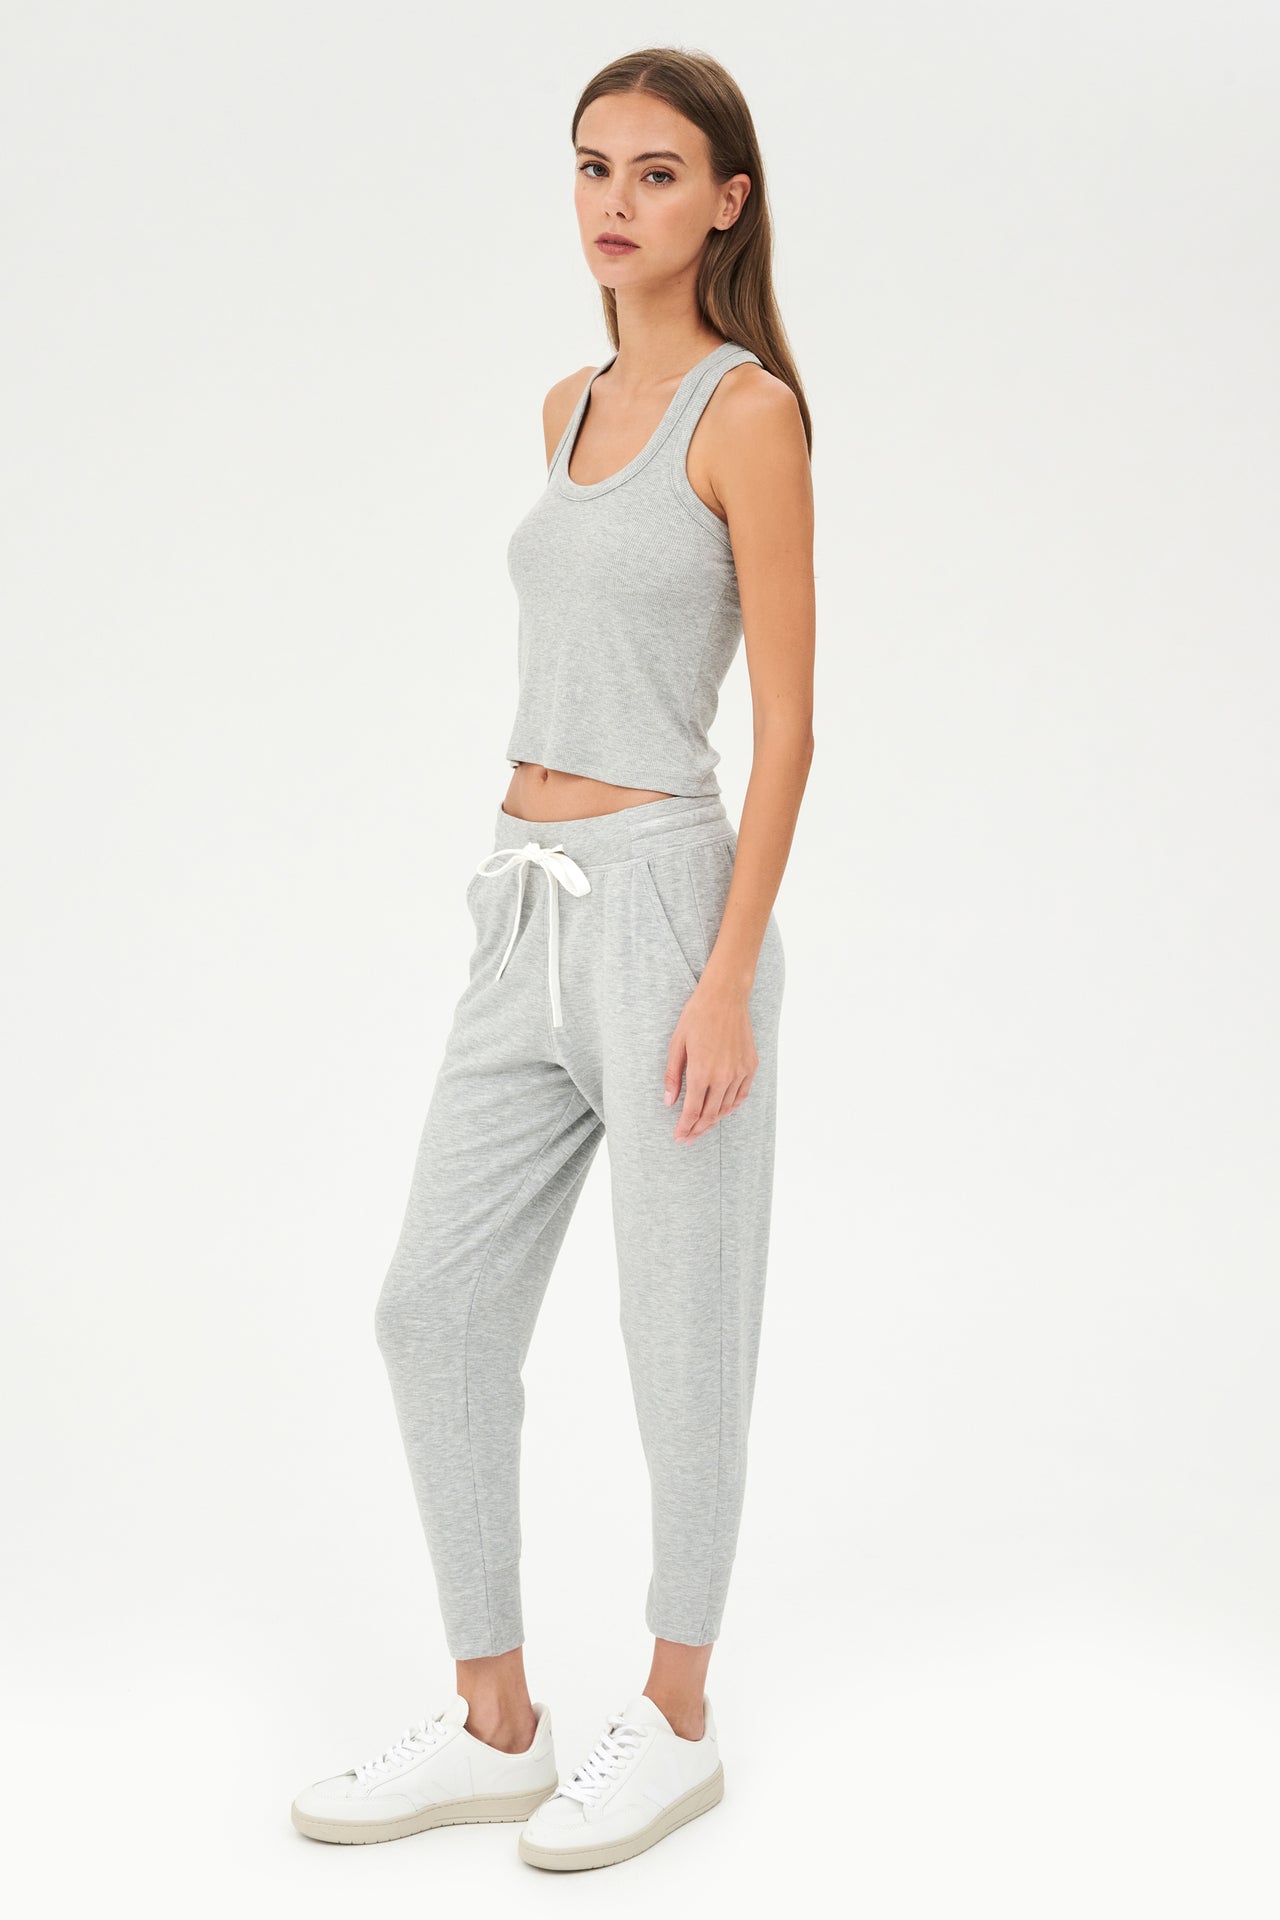 Full side view of girl wearing a ribbed grey cropped tank top and grey sweatpants with a white tie along the waistband with white shoes